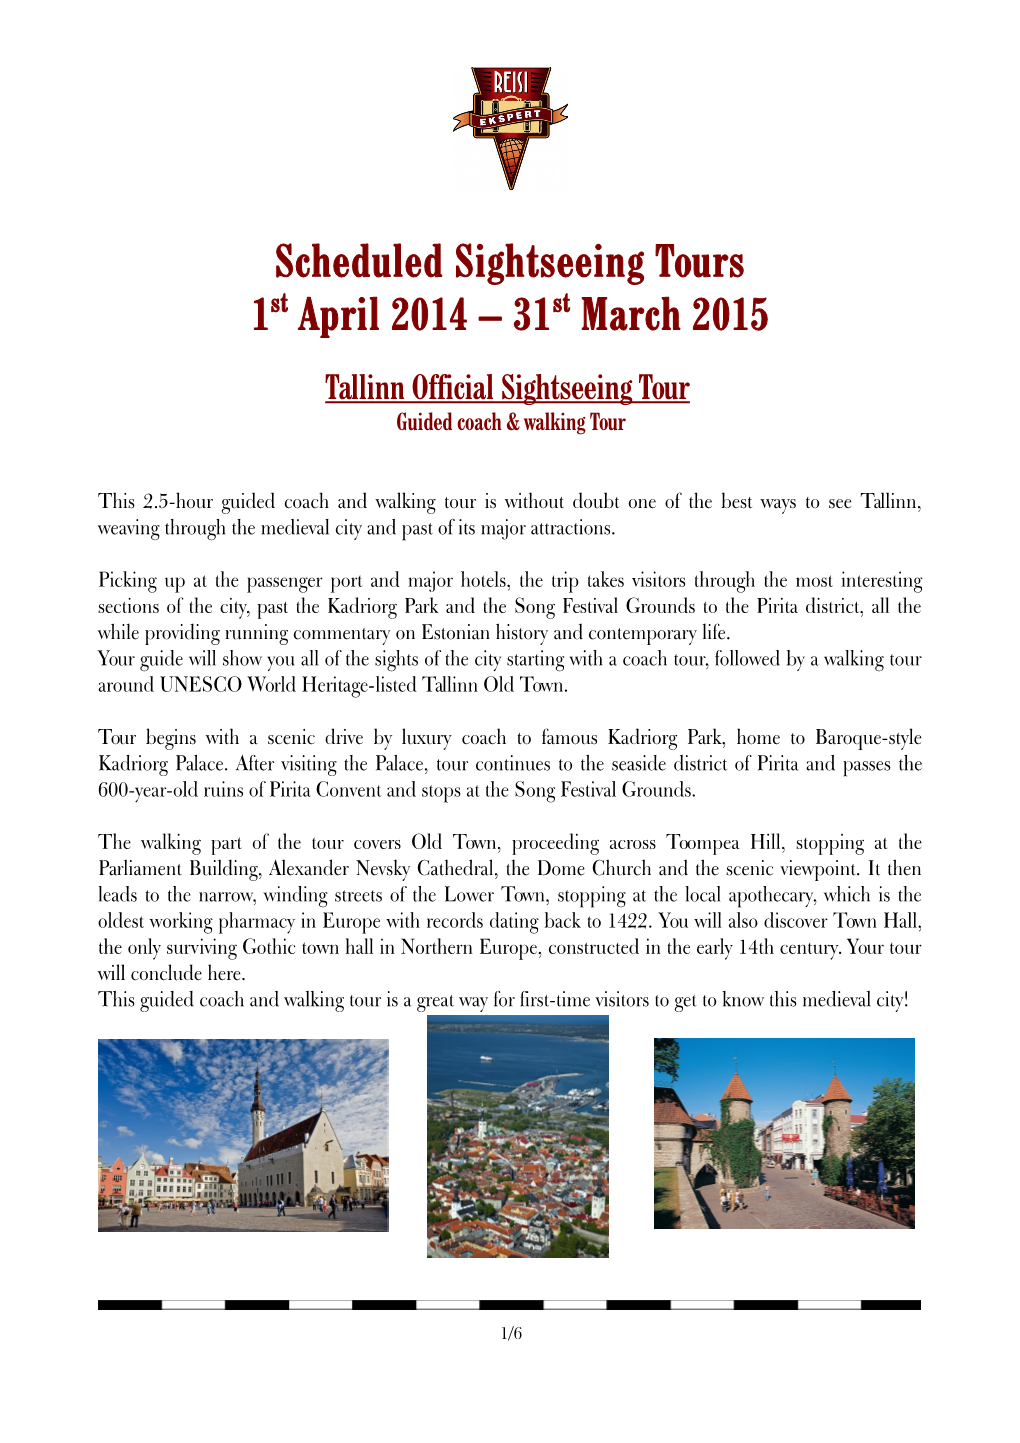 Scheduled Sightseeing Tours 1St April 2014 – 31St March 2015 Tallinn Official Sightseeing Tour Guided Coach & Walking Tour